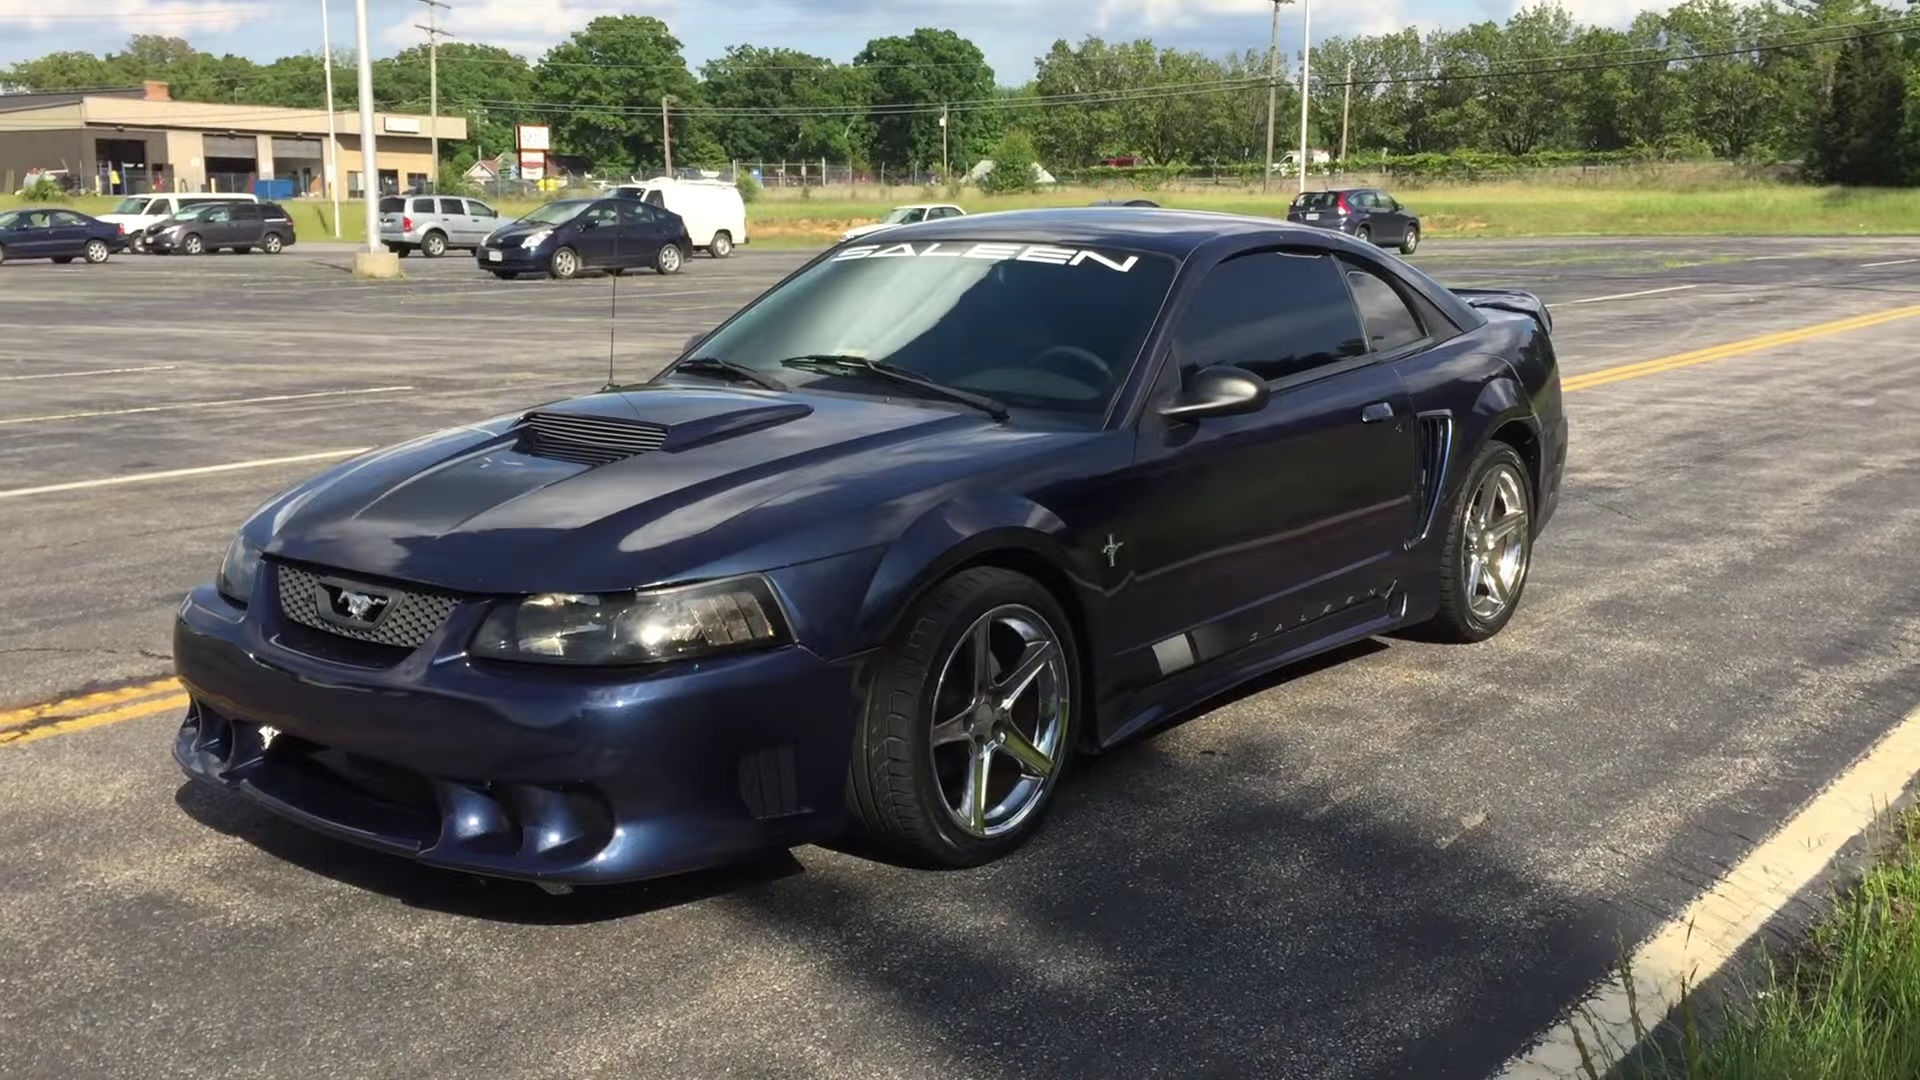 Video: Incredibly Gorgeous 2001 Ford Mustang Saleen